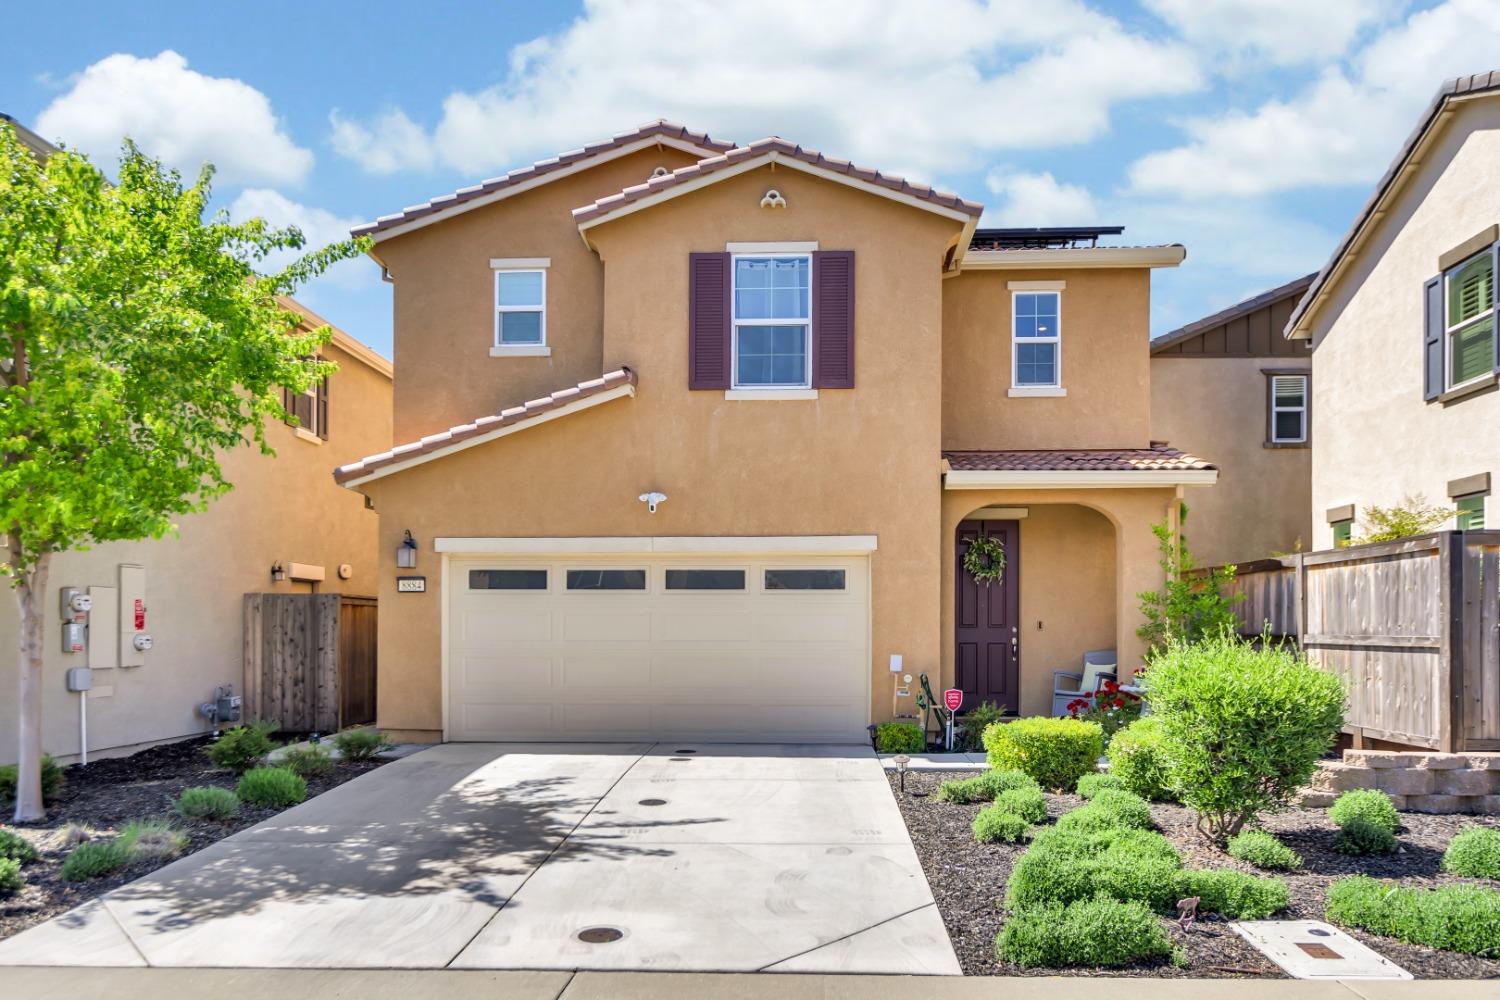 Welcome to your new home in the gated and safe community of Sheldon Terrace in Elk Grove! This charm